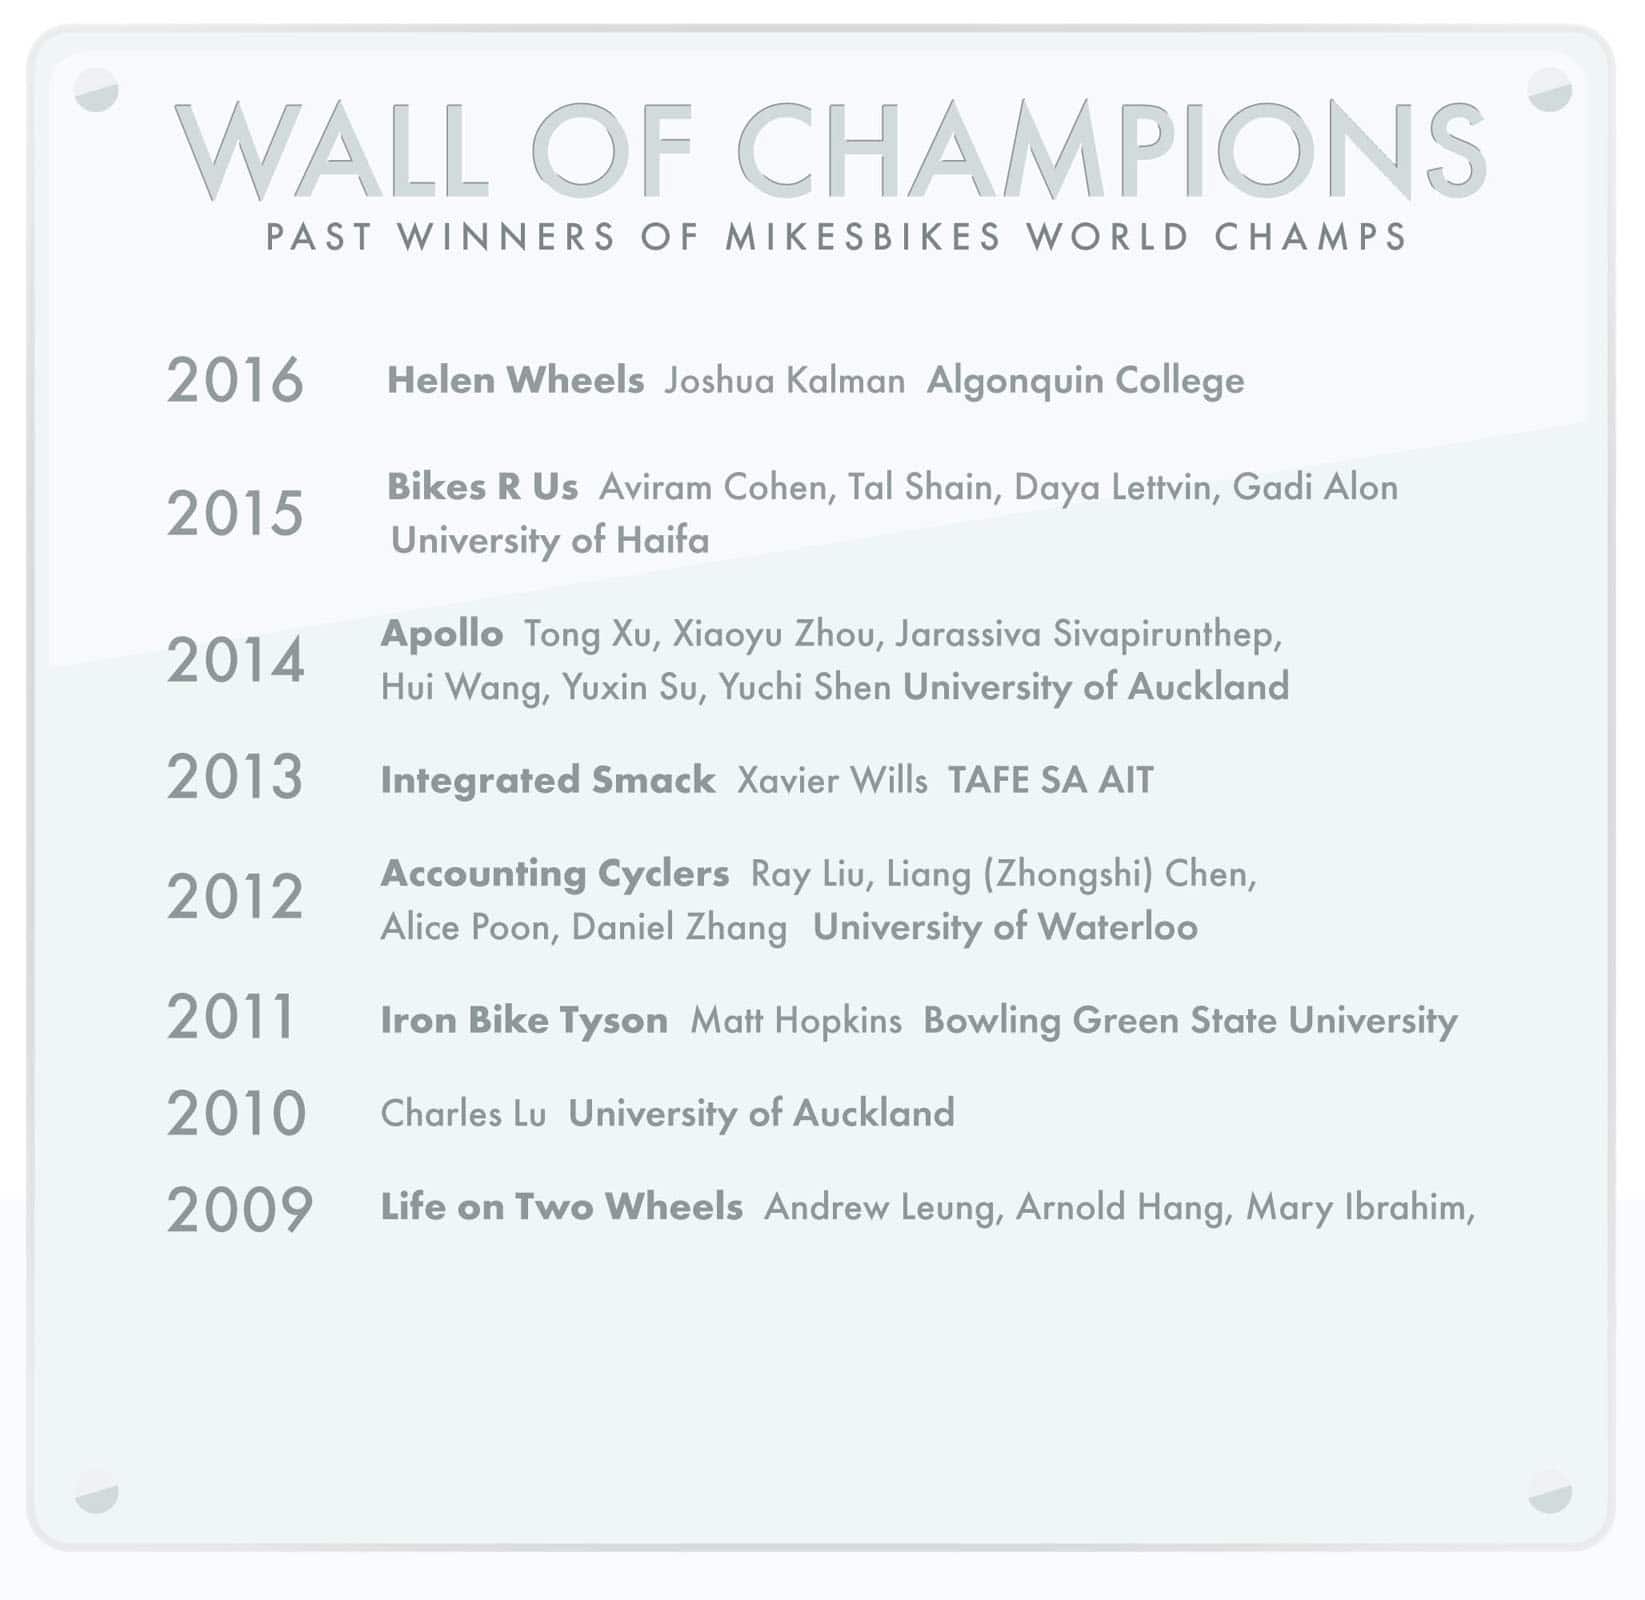 List of all the MikesBikes World Champions